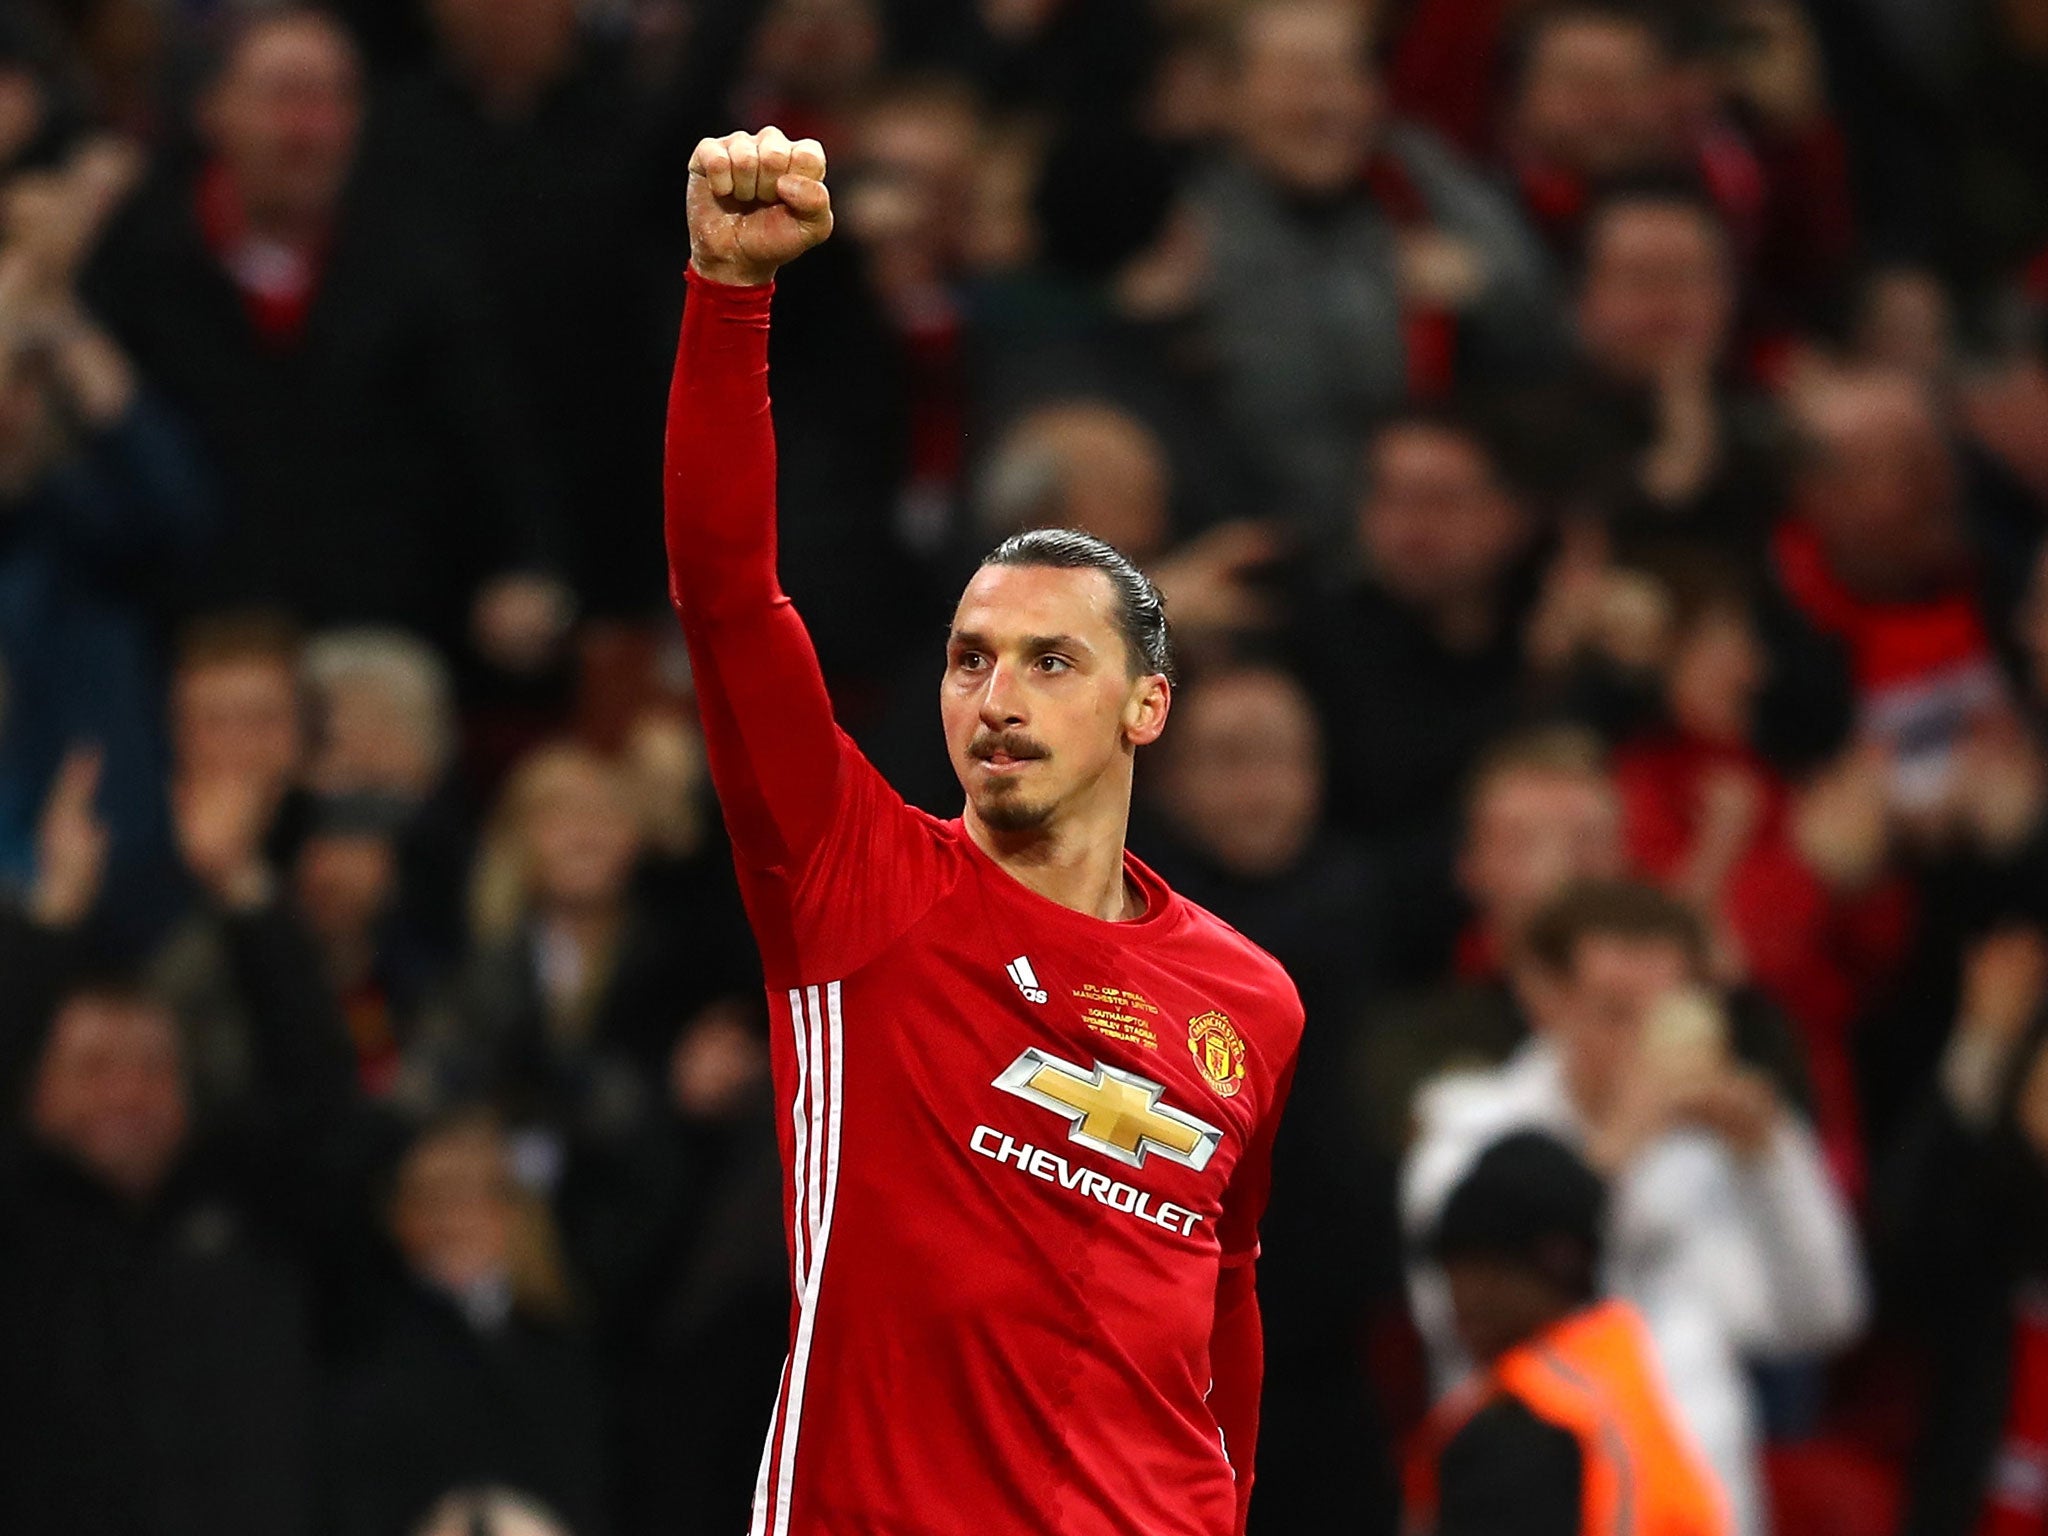 Ibrahimovic celebrates his opening goal for United in Sunday's EFL Cup final